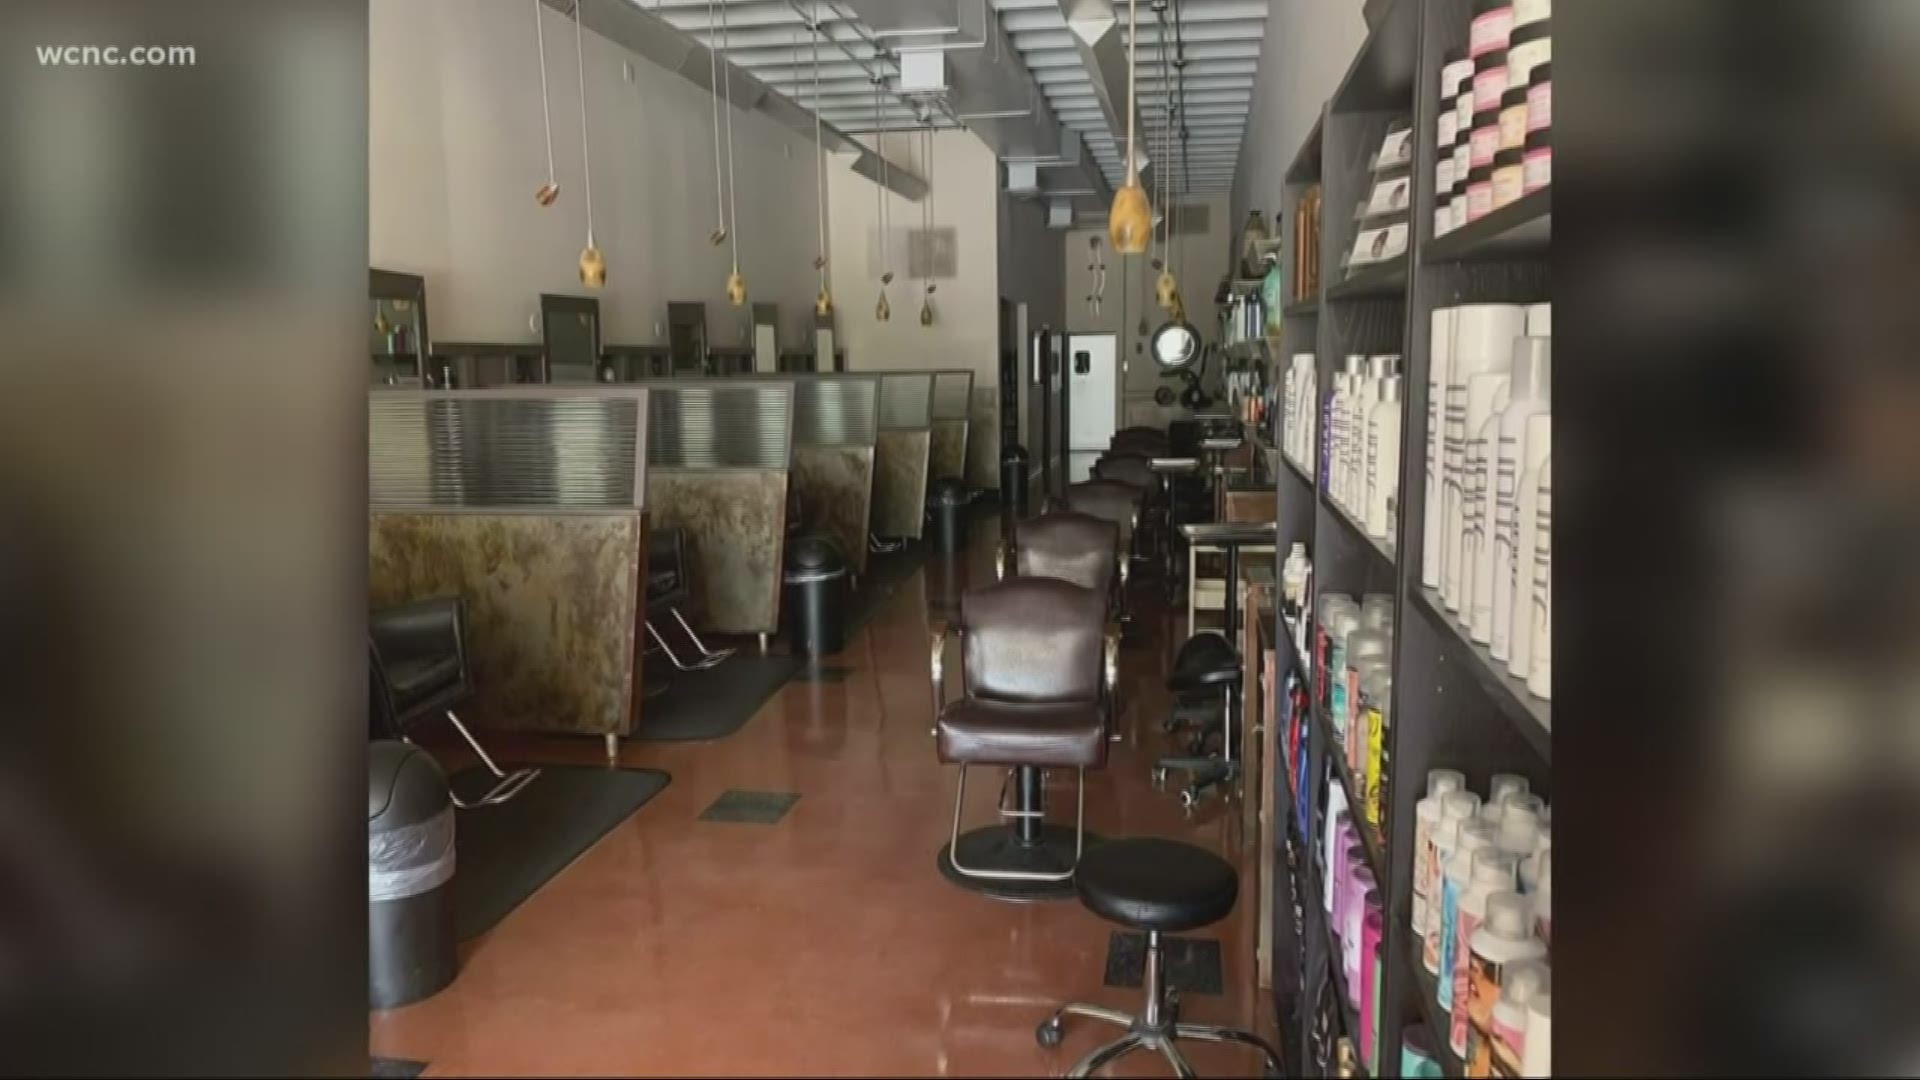 Several Charlotte-area salons didn’t even wait for the governor's order to take effect before closing. That includes Mimosas Nail Bar and Salon 42.